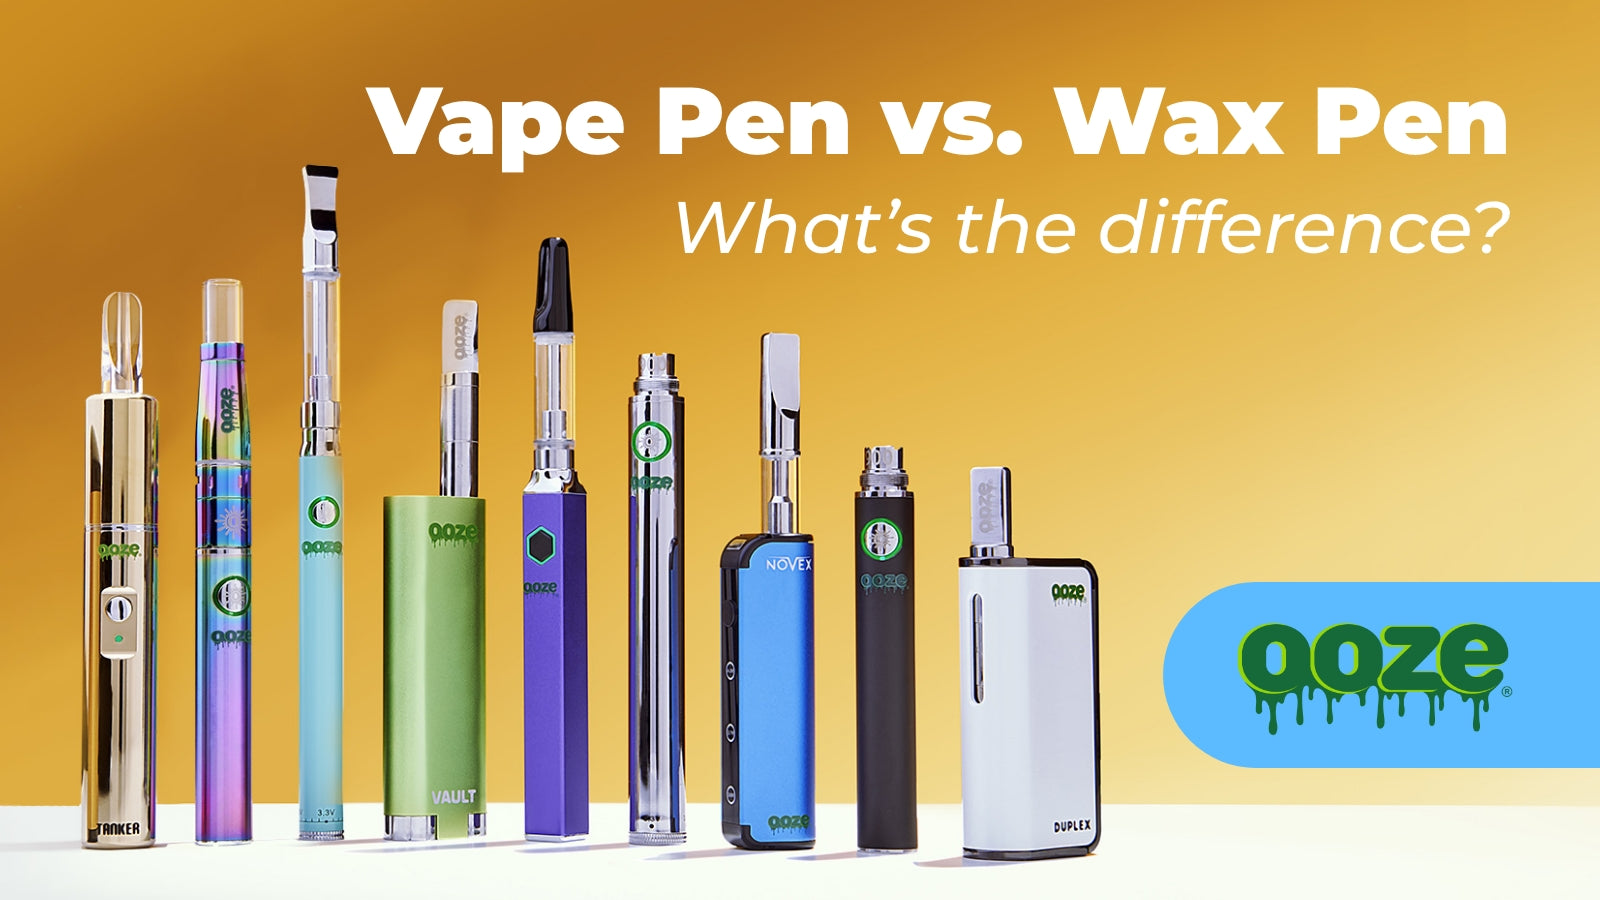 Vape Pen vs. Wax Pen - What's the Difference?